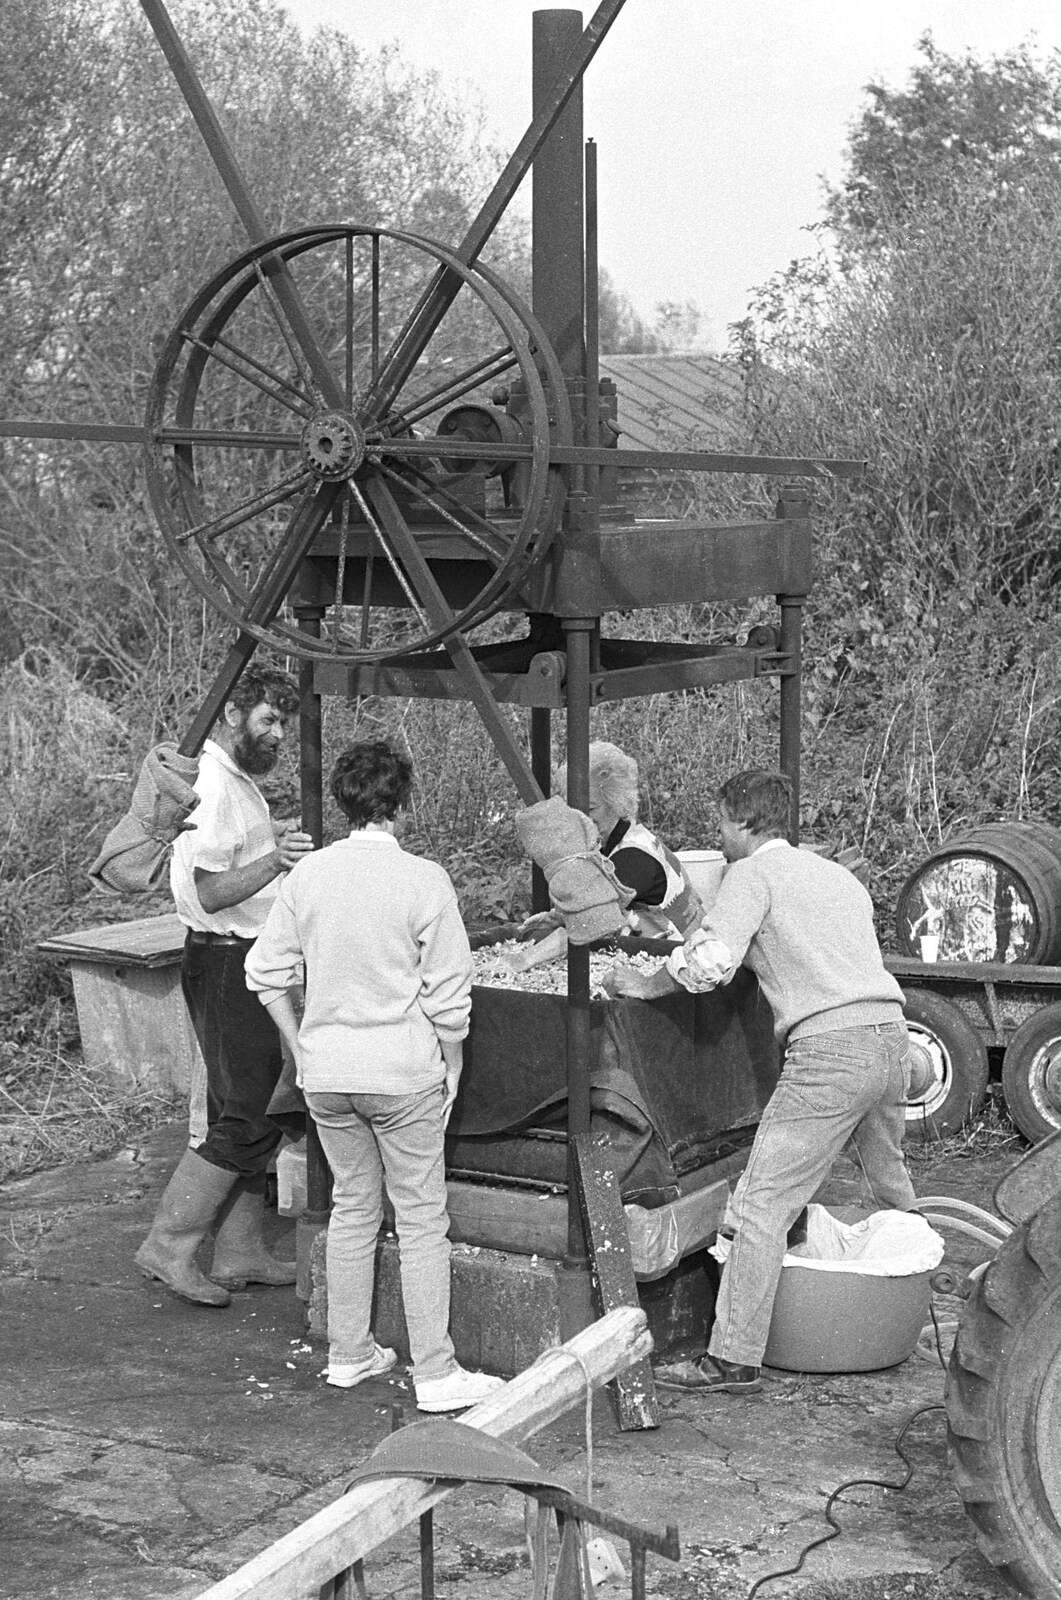 Activity around the press from Cider Making in Black and White, Stuston, Suffolk - 11th October 1992